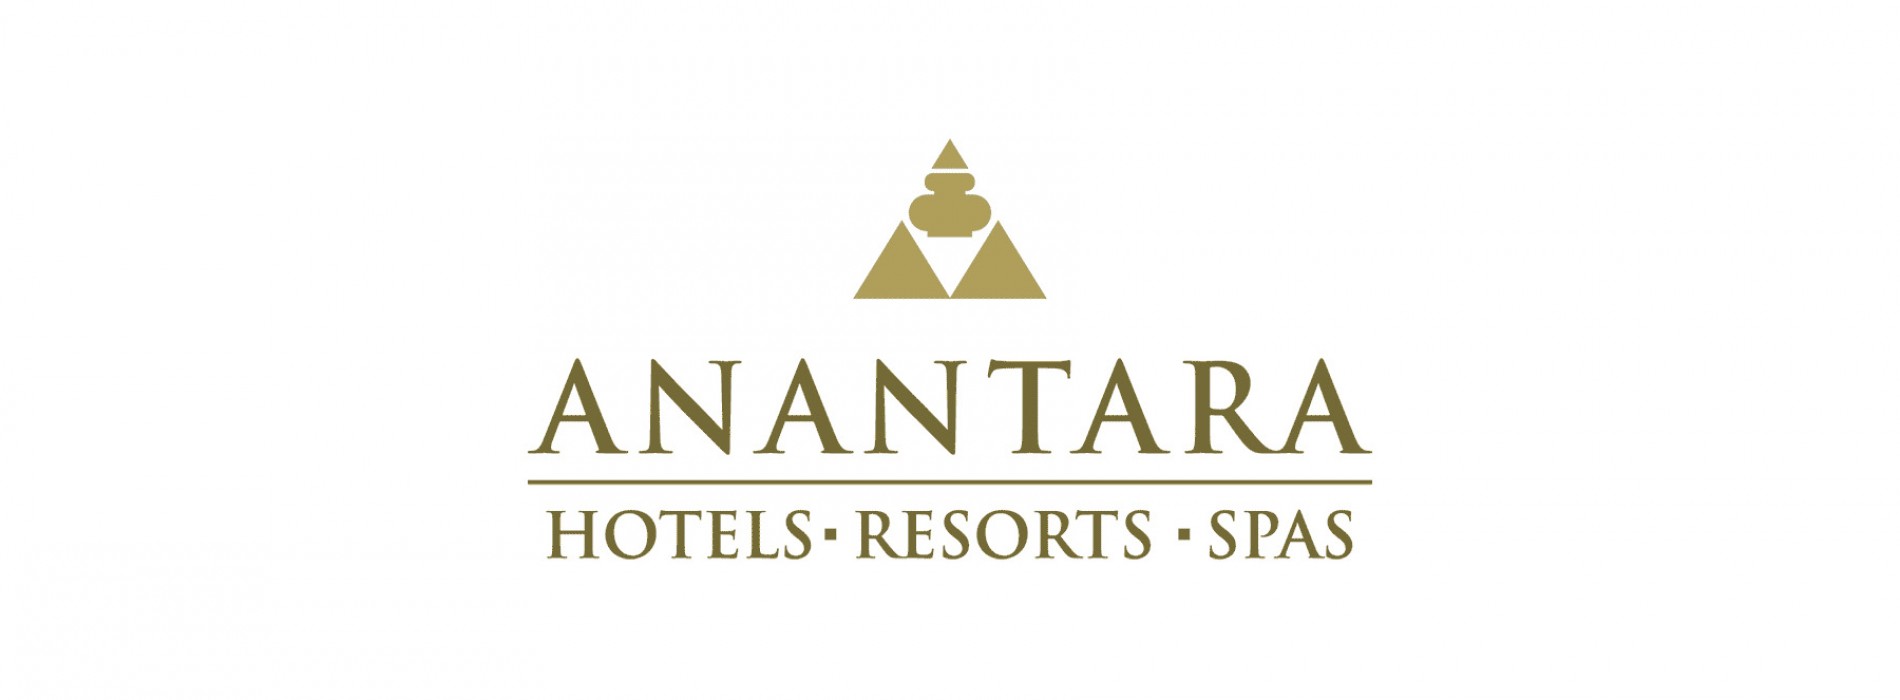 Anantara Hotels, Resorts & Spas Announces New General Manager Appointments in Multiple Regions